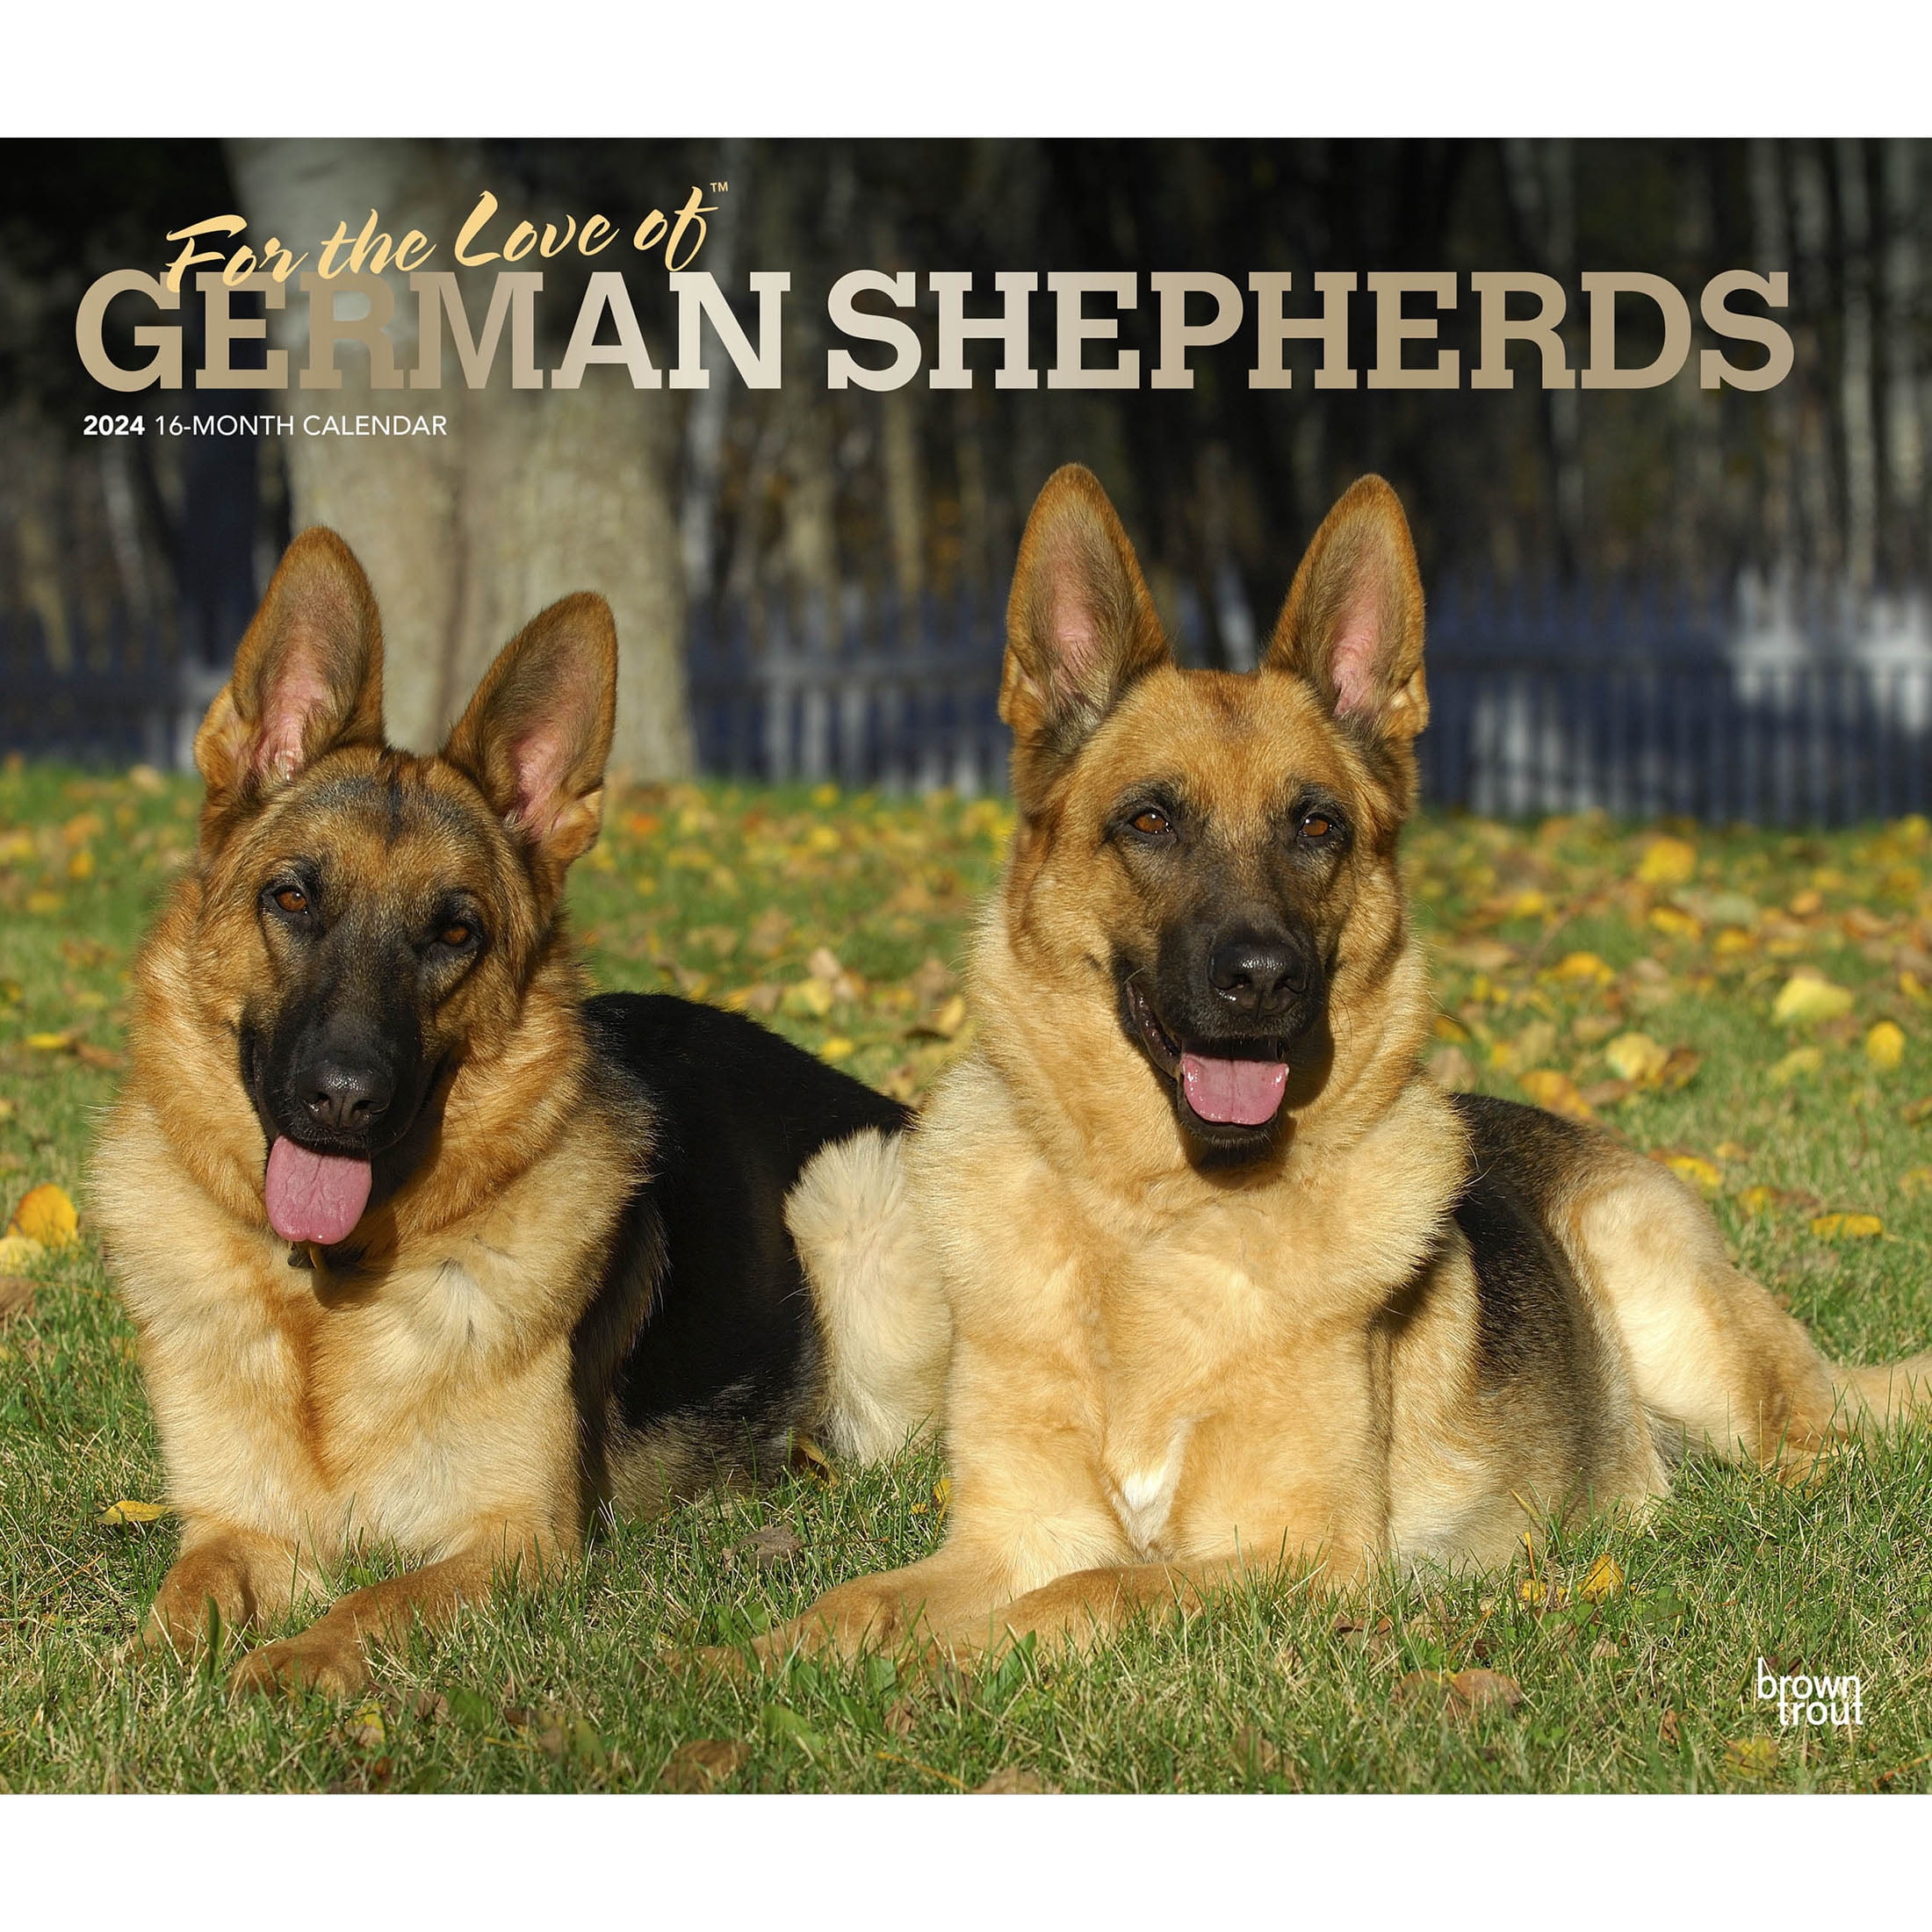 For the Love of German Shepherds | 2024 14x24